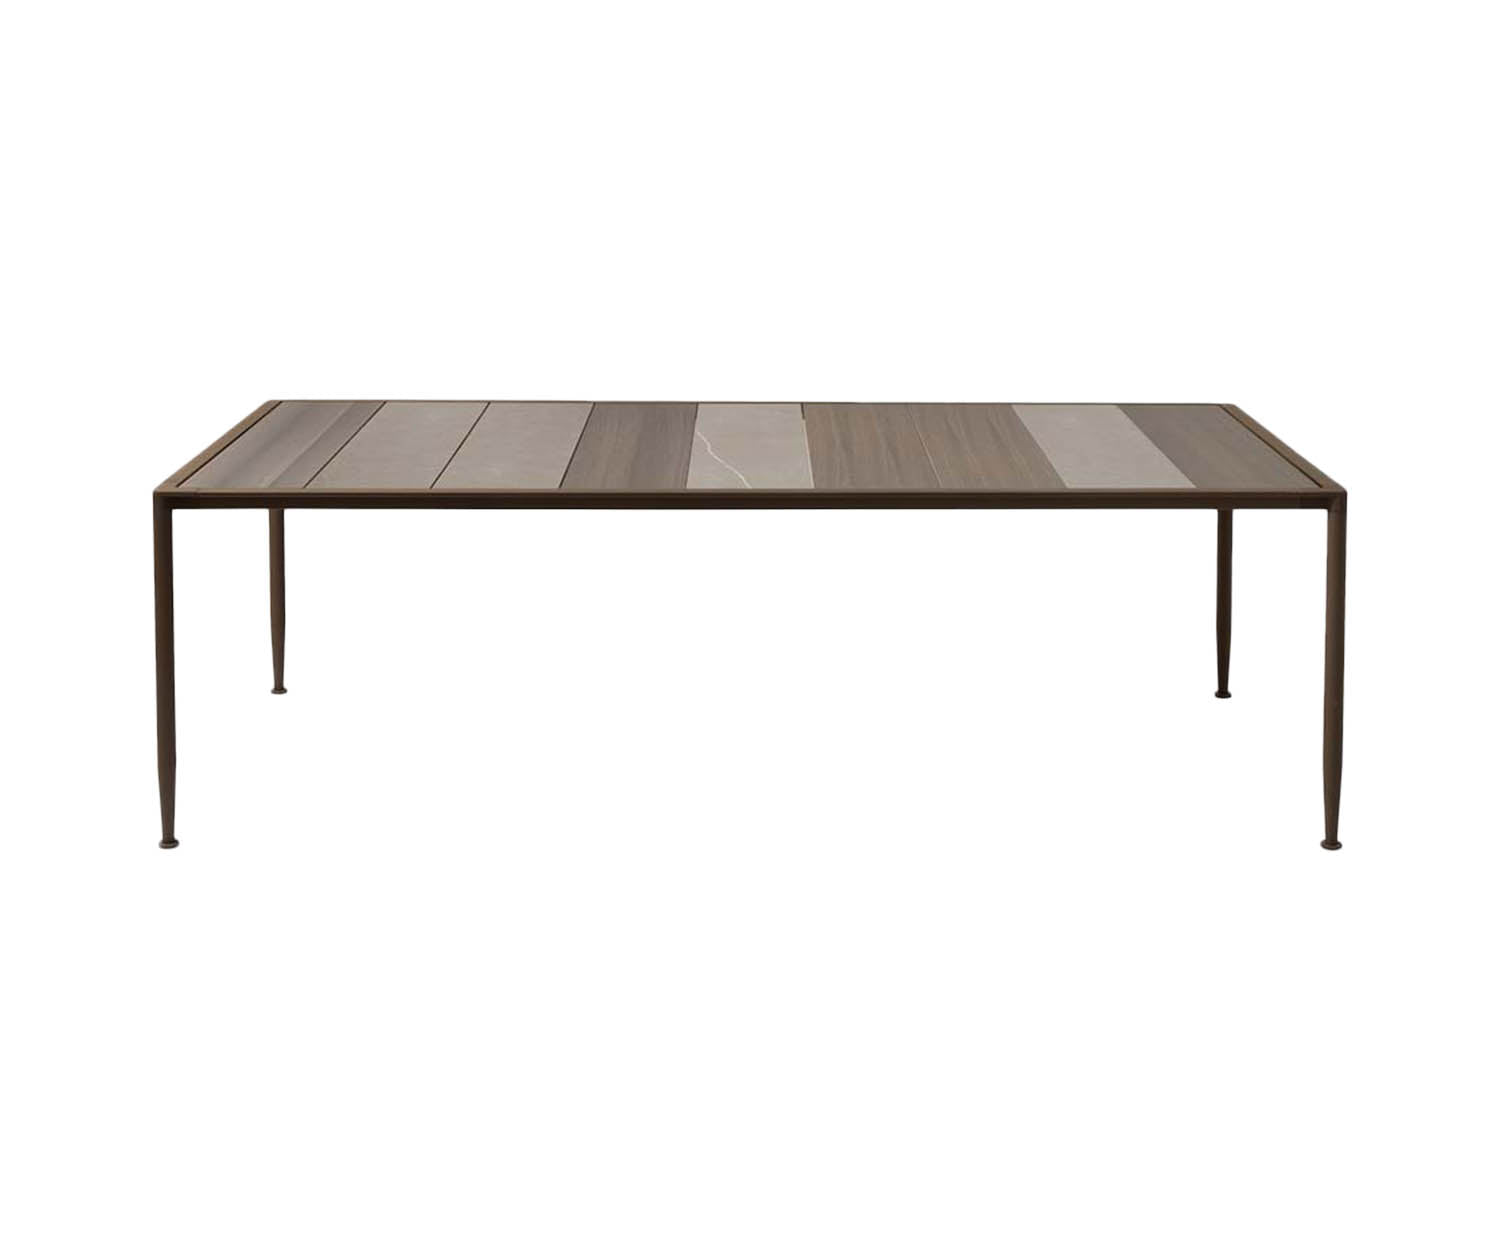 Gea Outdoor Dining Table Giorgetti